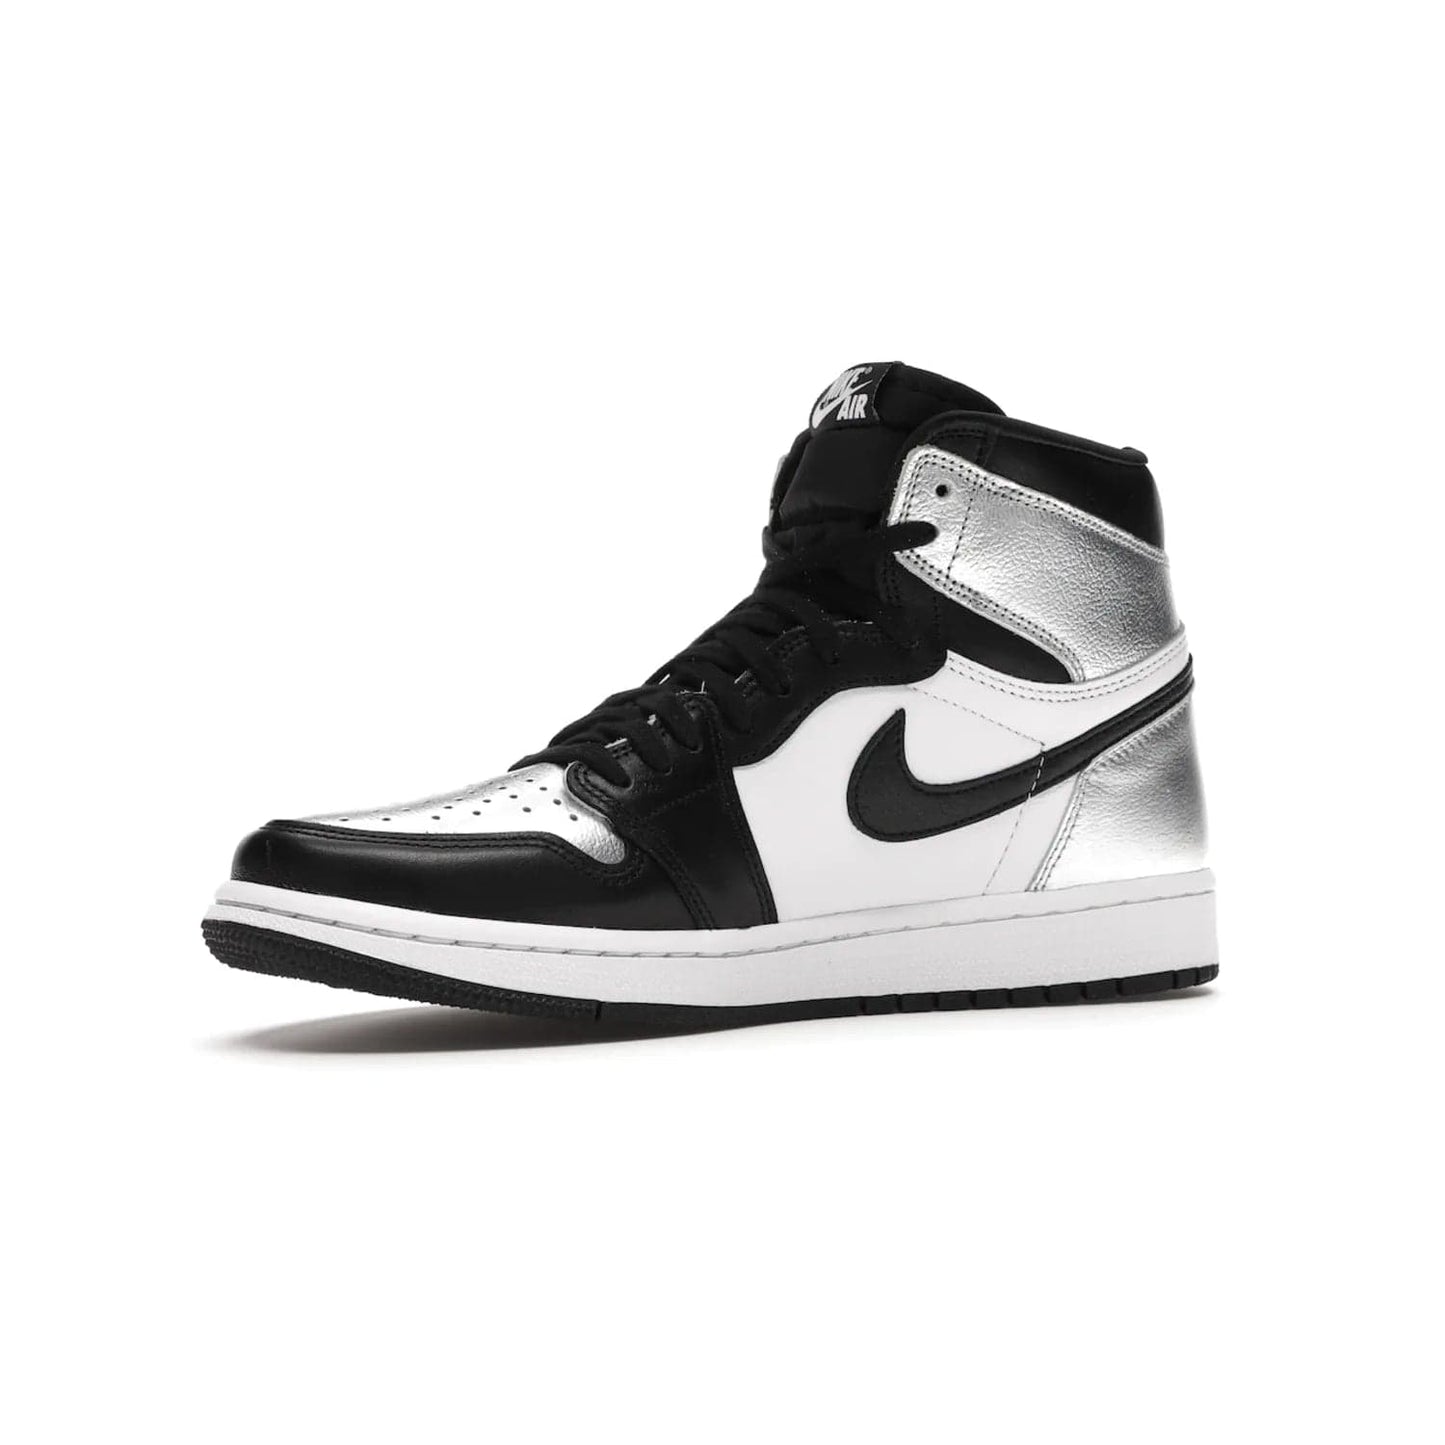 Jordan 1 Retro High Silver Toe (Women's) - Image 16 - Only at www.BallersClubKickz.com - Introducing the Jordan 1 Retro High Silver Toe (Women's): an updated spin on the iconic 'Black Toe' theme. Featuring white & black leather and silver patent leather construction. Nike Air branding, Air Jordan Wings logo, and white/black sole finish give a classic look. The perfect addition to an on-trend streetwear look. Available in classic black & white, this Jordan 1 is an instant classic. Released in February 20